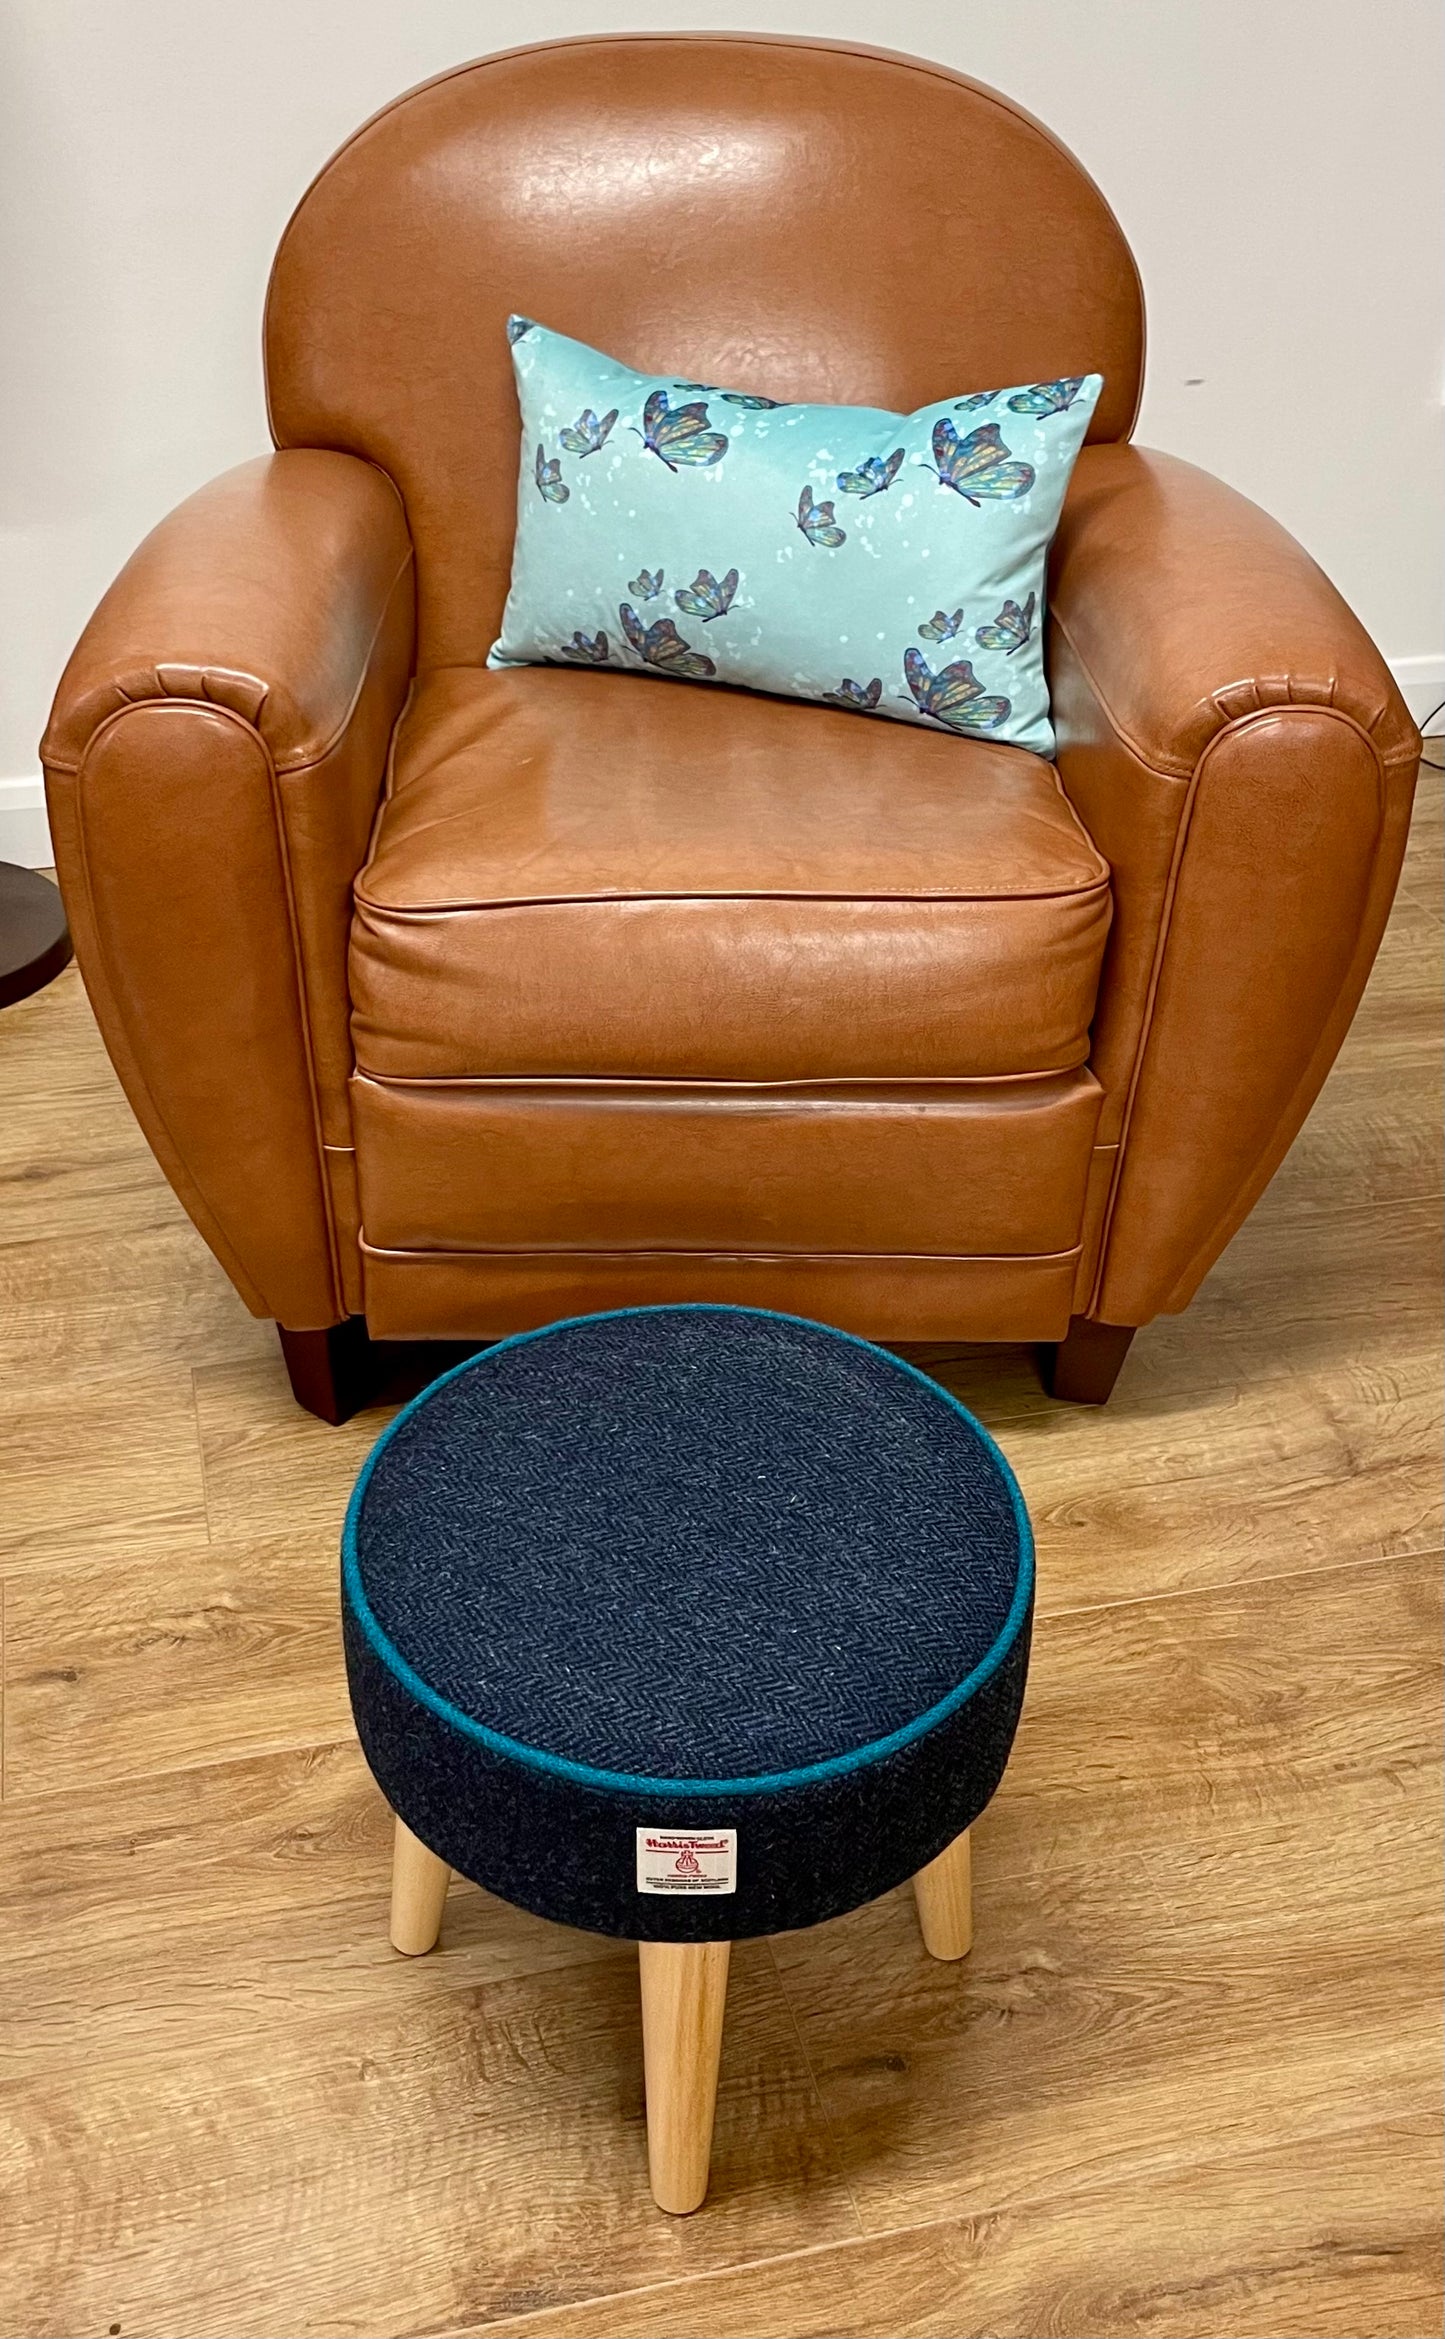 Navy Harris Tweed Footstool with Teal Piping and Varnished Wooden Legs